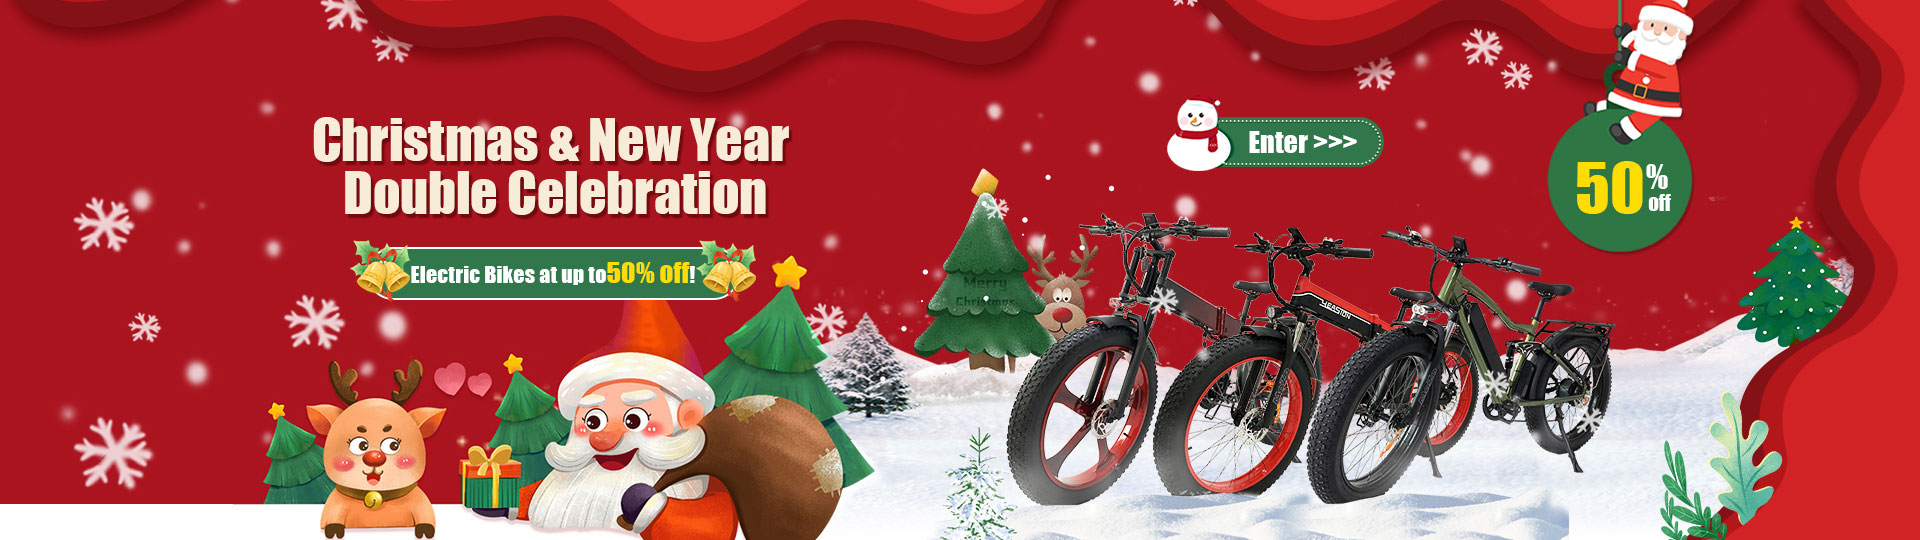 Double Celebration at Cyclemix Christmas & New Year Special!